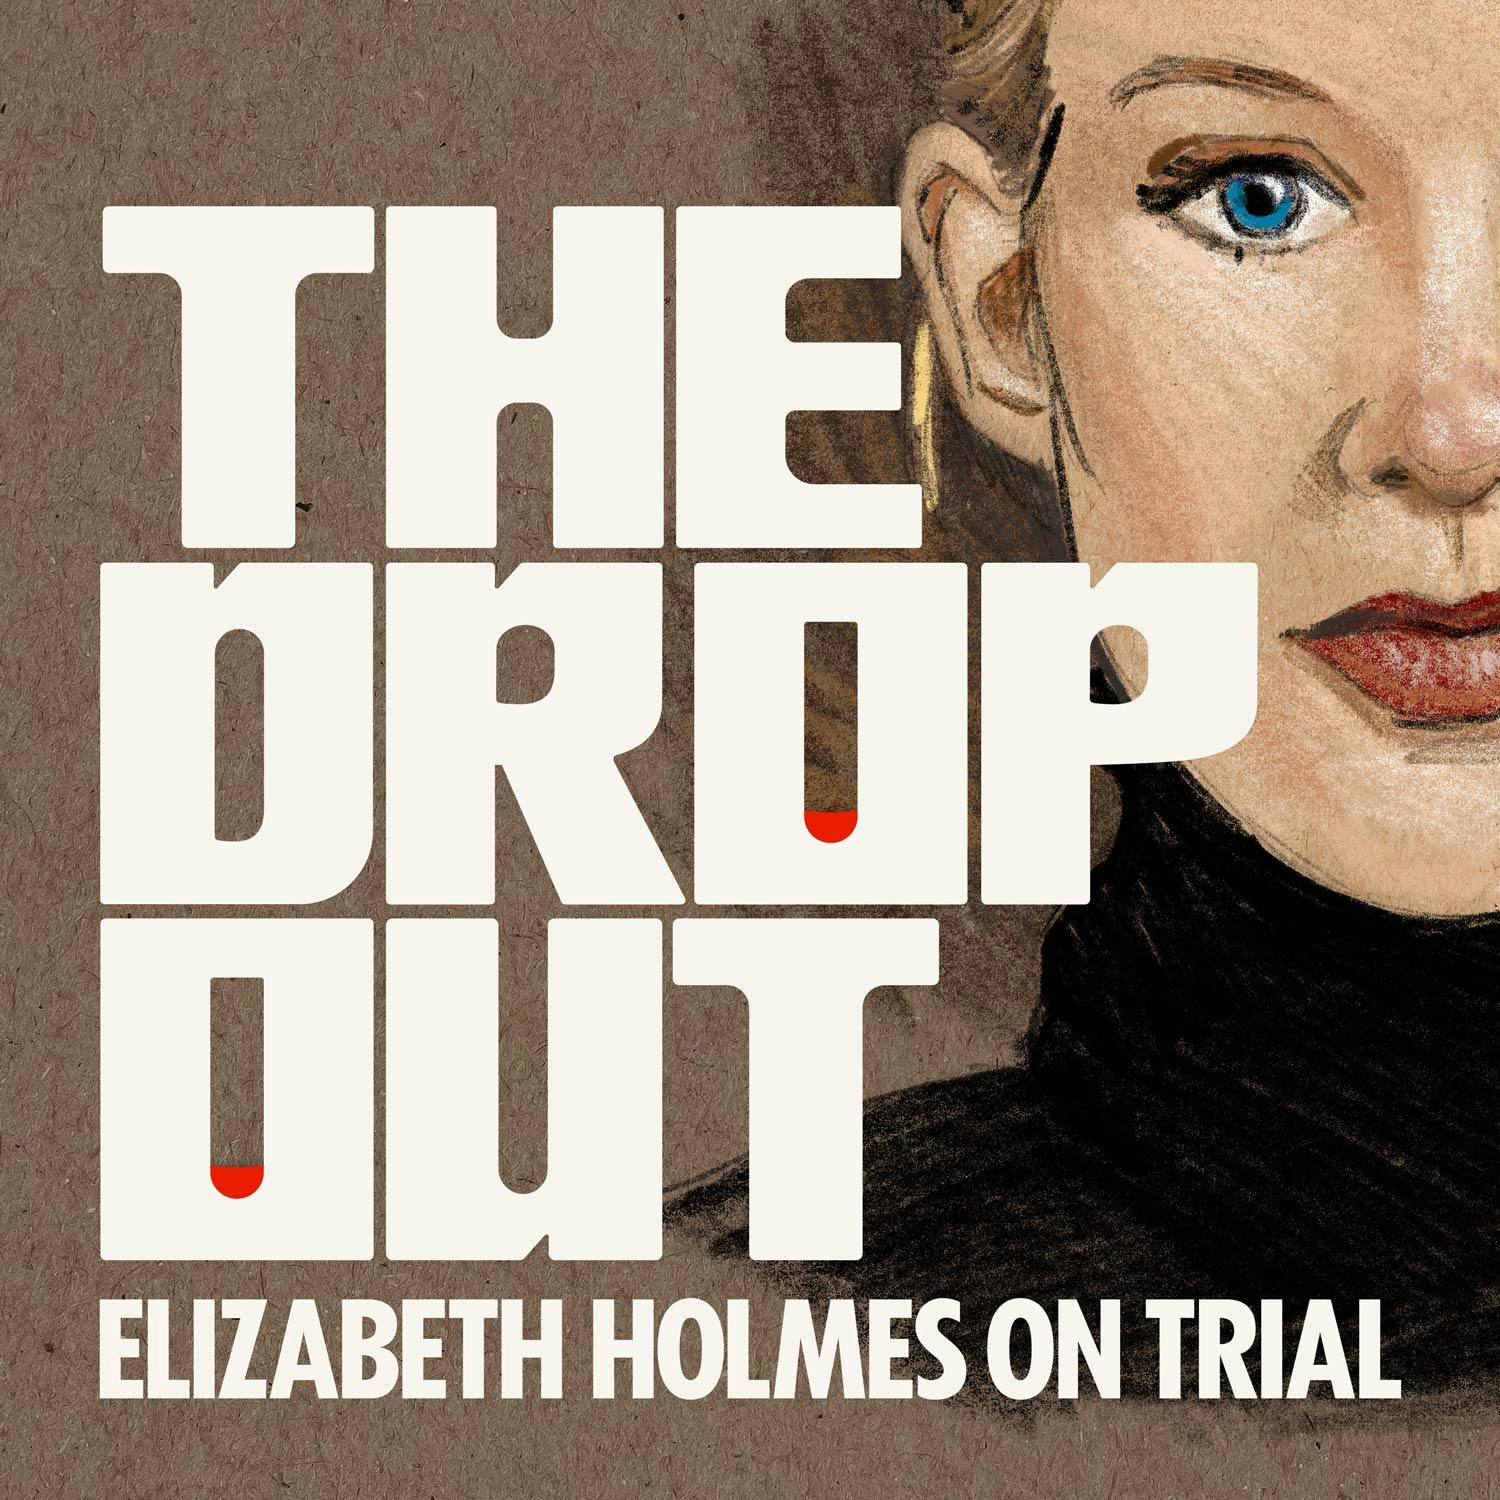 Introducing ’The Dropout: Elizabeth Holmes on Trial’